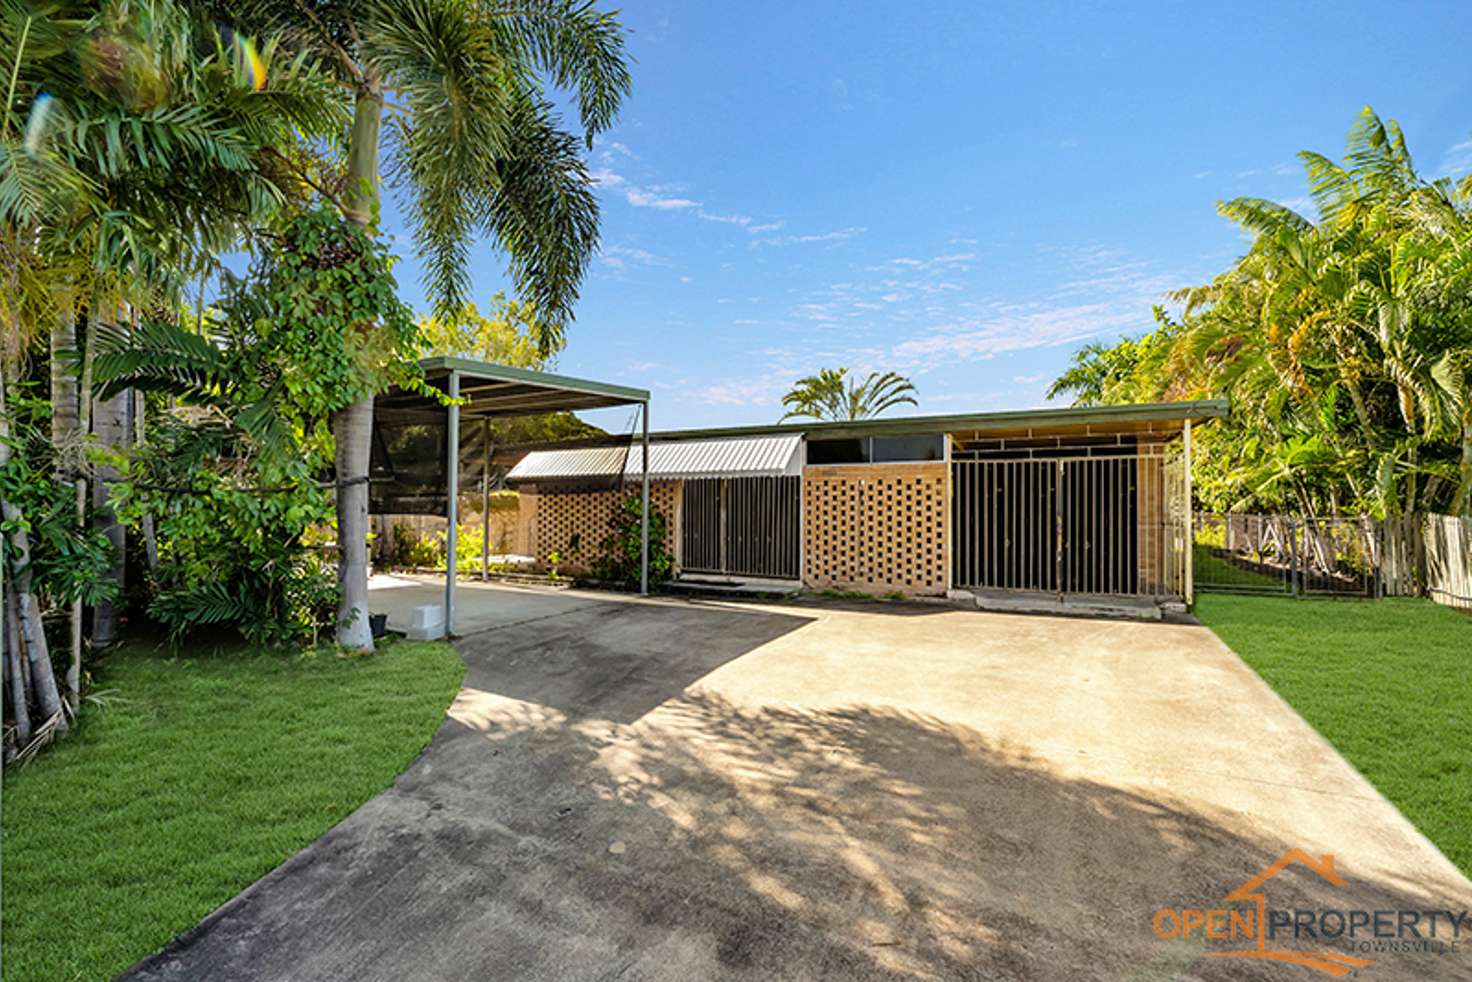 Main view of Homely house listing, 46 O'Reilly St, Mundingburra QLD 4812